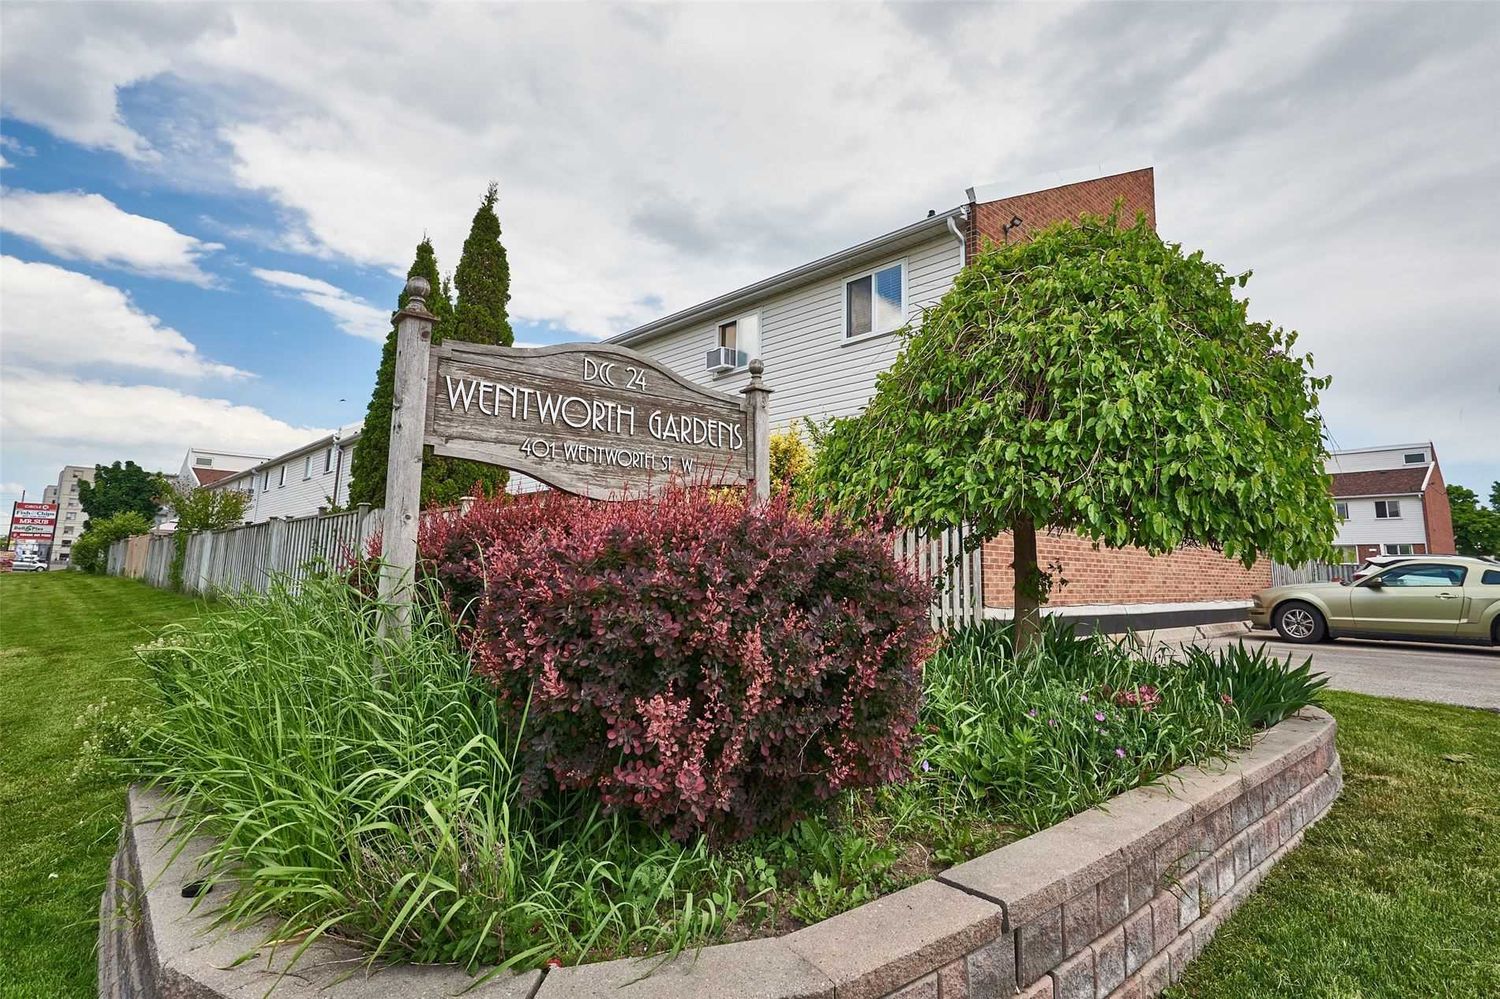 401 Wentworth Street W. Wentworth Gardens Townhomes is located in  Oshawa, Toronto - image #1 of 3